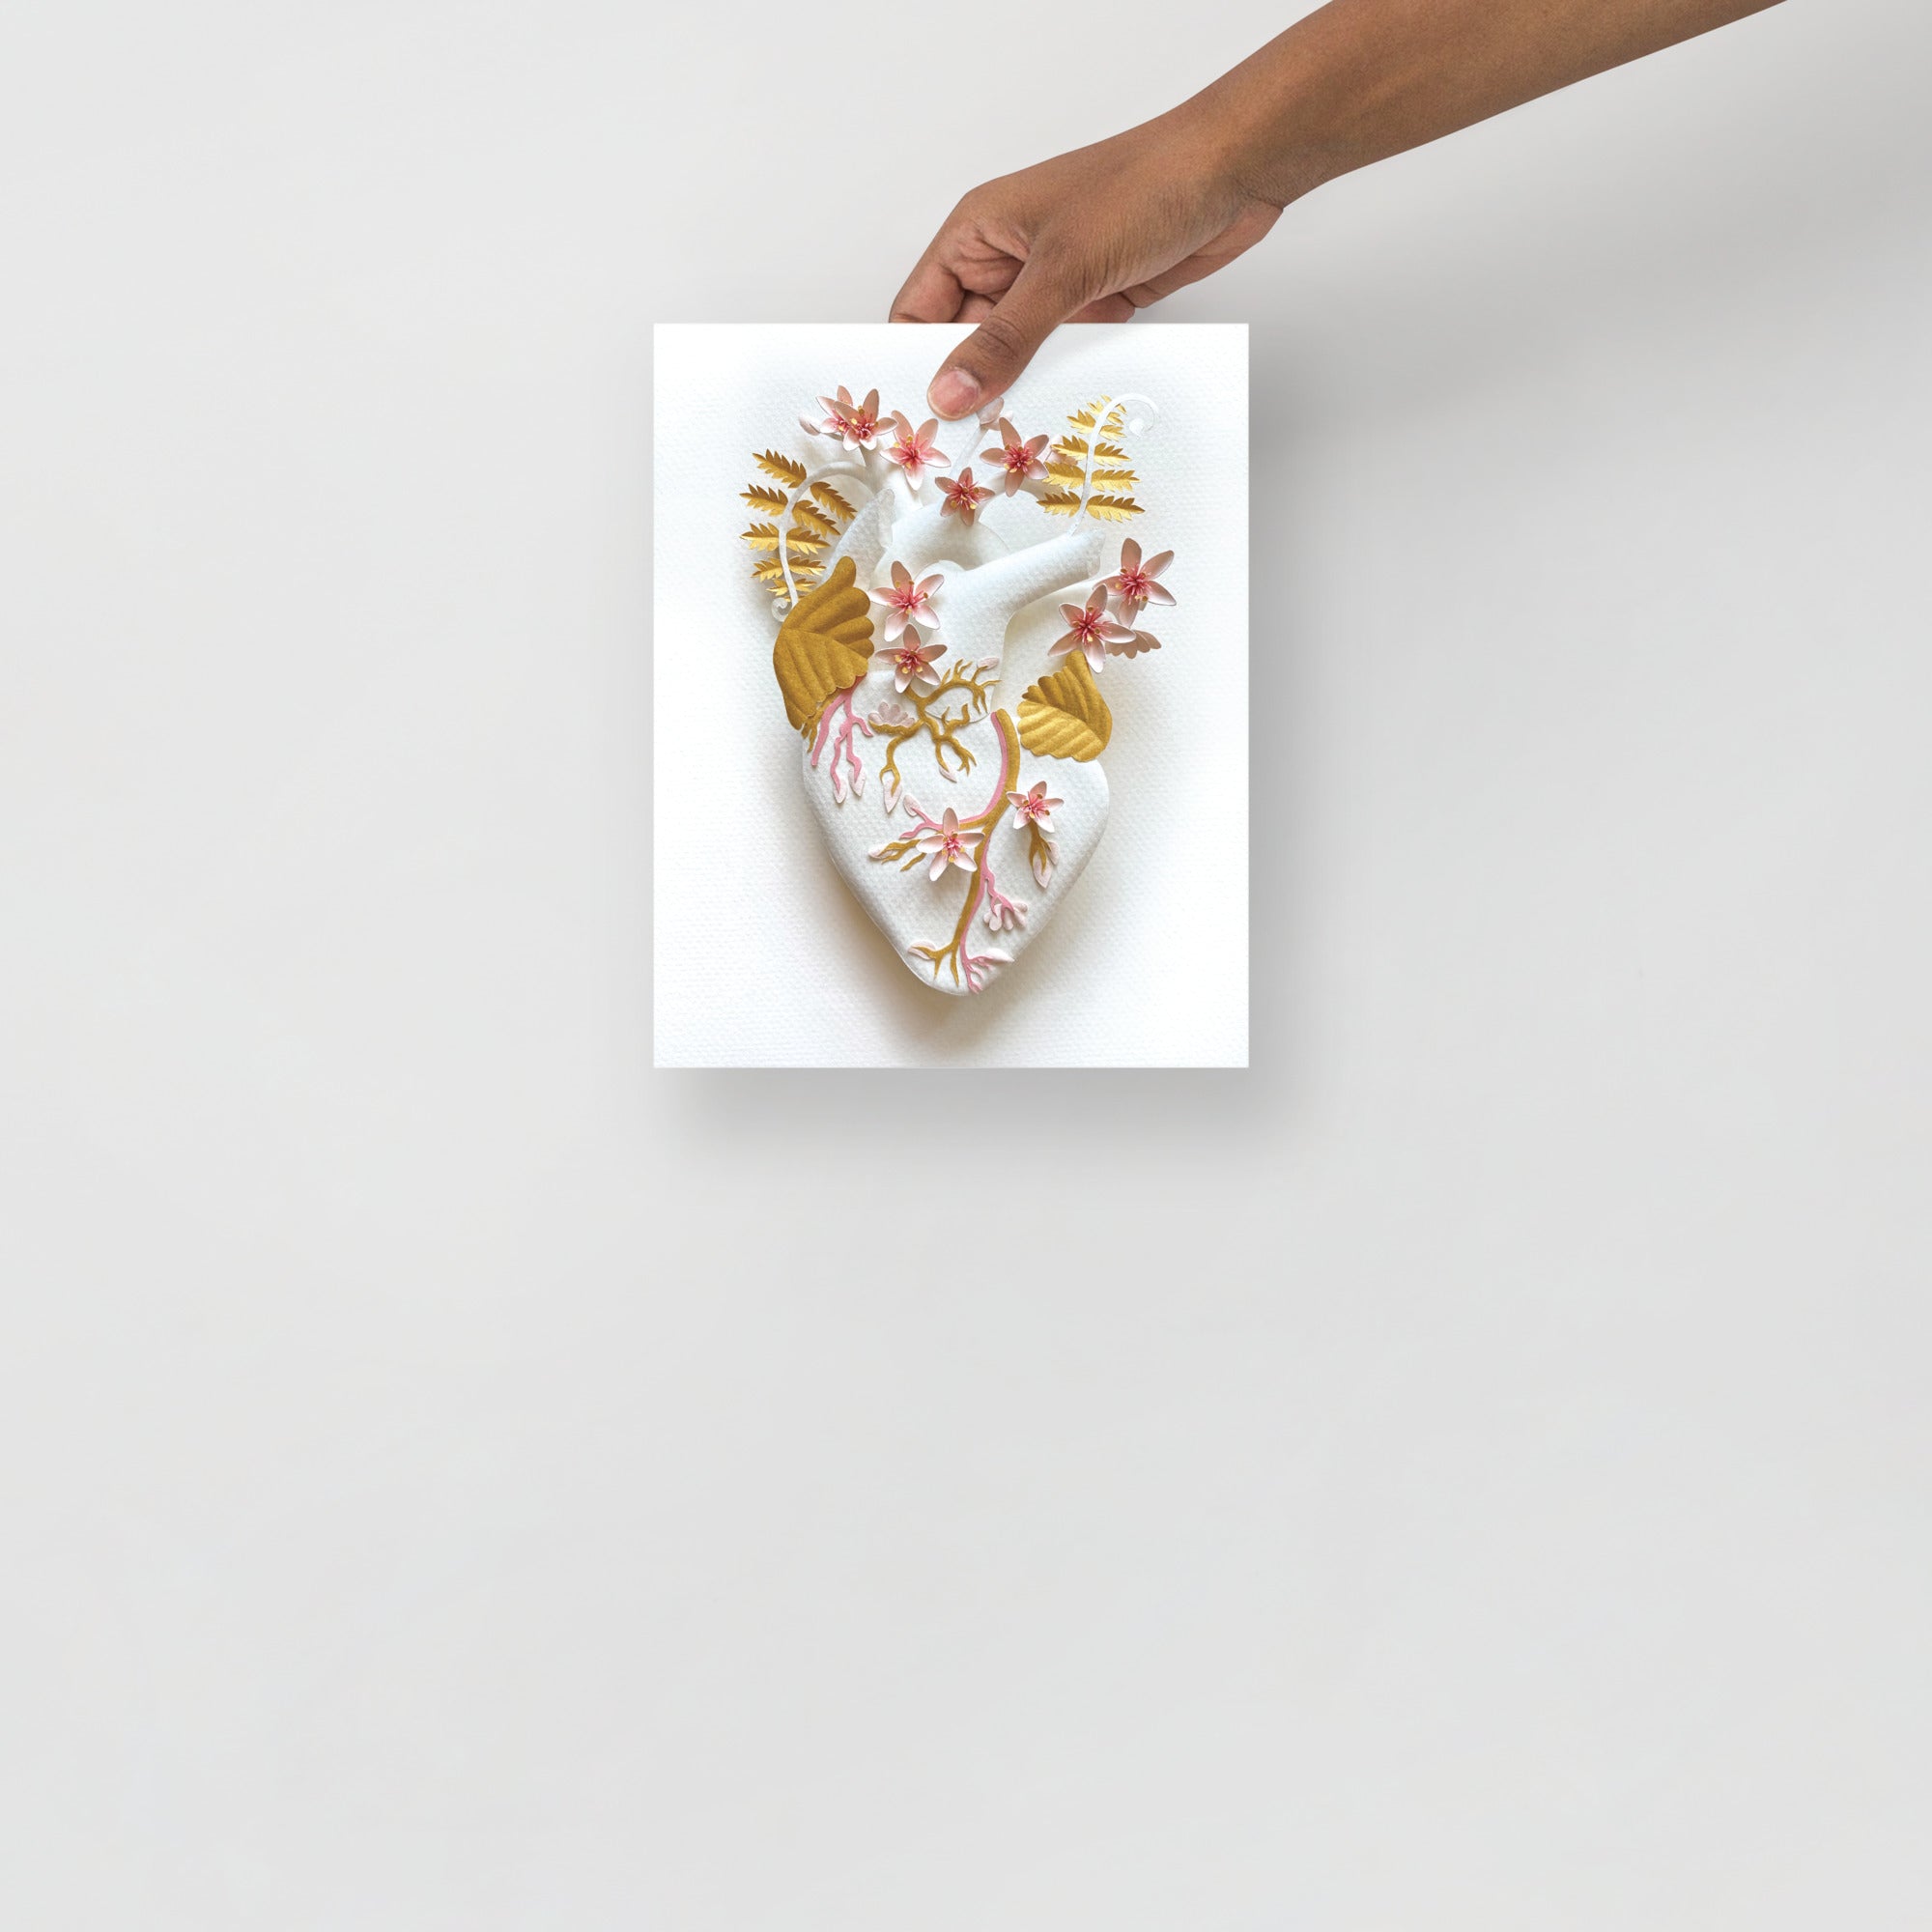 Anatomical heart with cherry blossoms and golden leaves made of hand cut paper